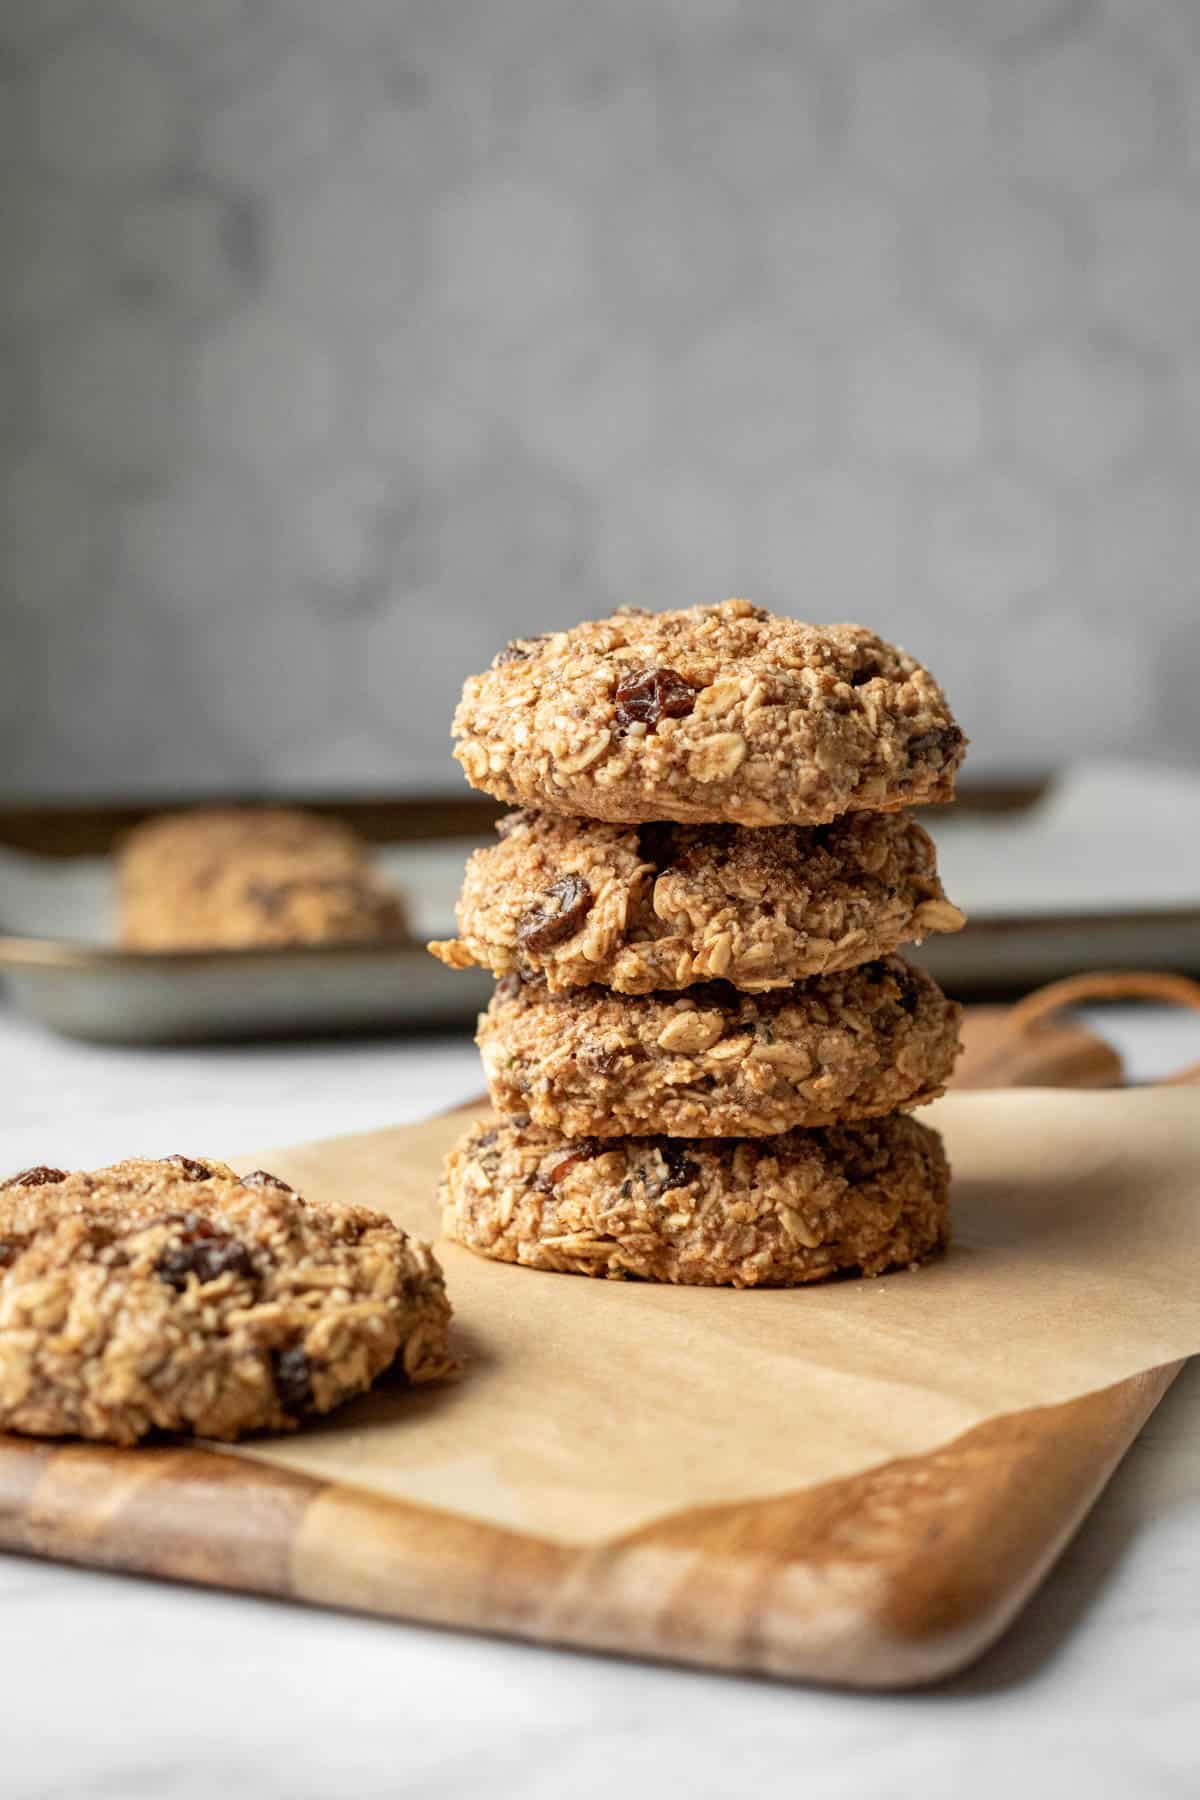 Thick vegan breakfast cookies stacked on a wood board against a gray tile background.